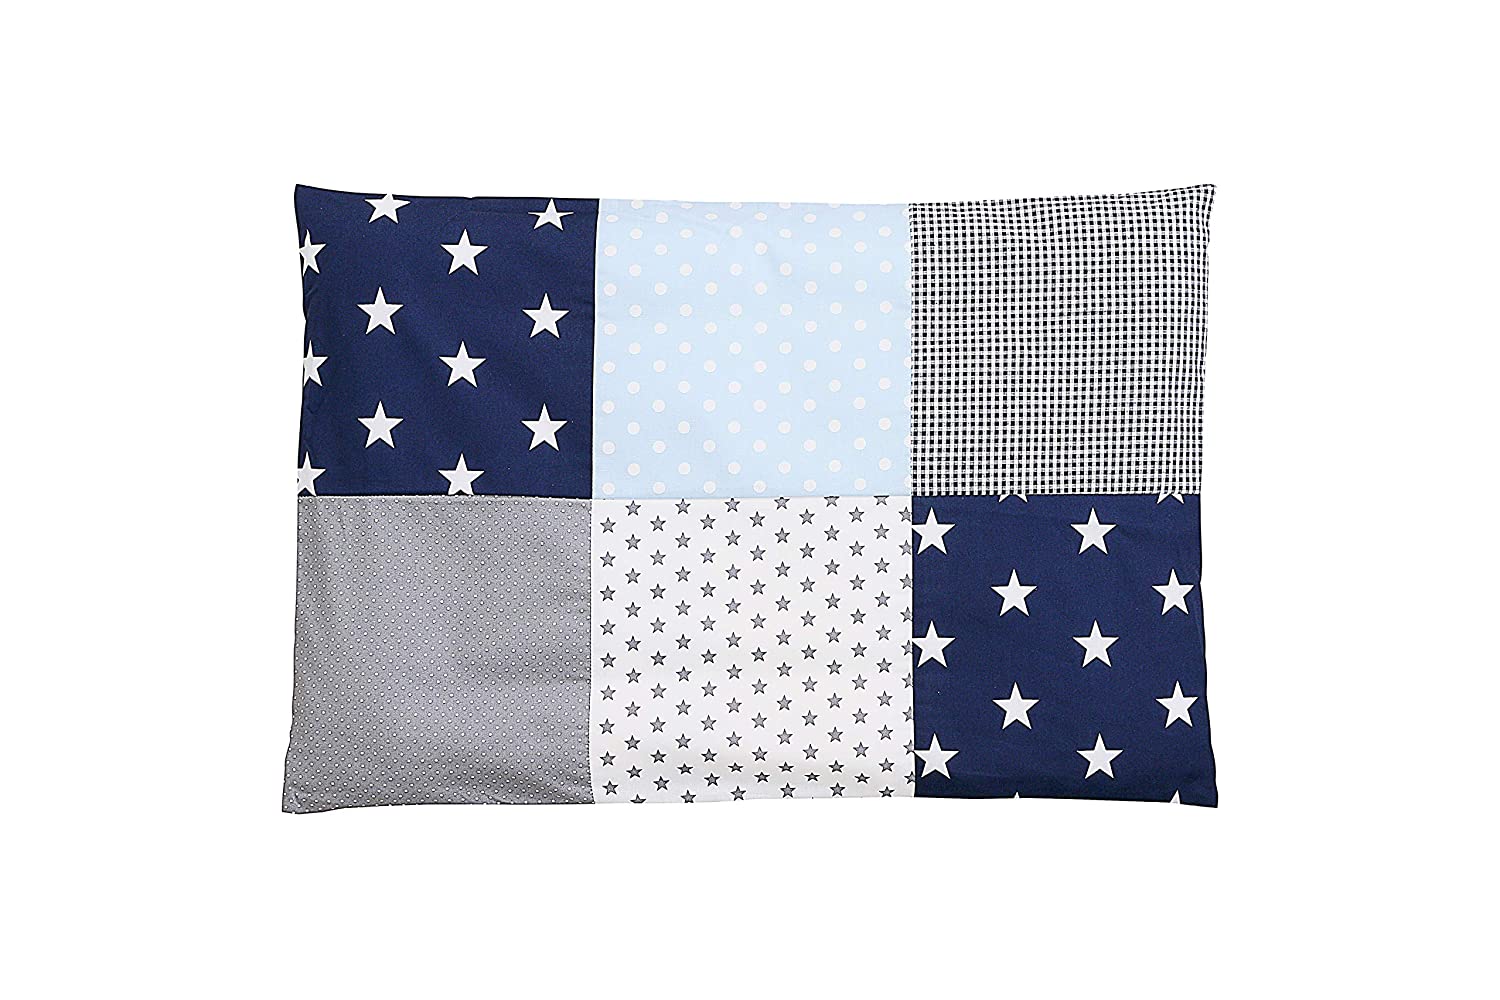 ULLENBOOM ® Cushion Cover 40 x 60 cm Children and Baby Blue / Light Blue / Grey (Made in EU) - Cotton Pillow Case with Zip - Cover Also Suitable for Decorative Cushions - Stars Motif - Patchwork Design